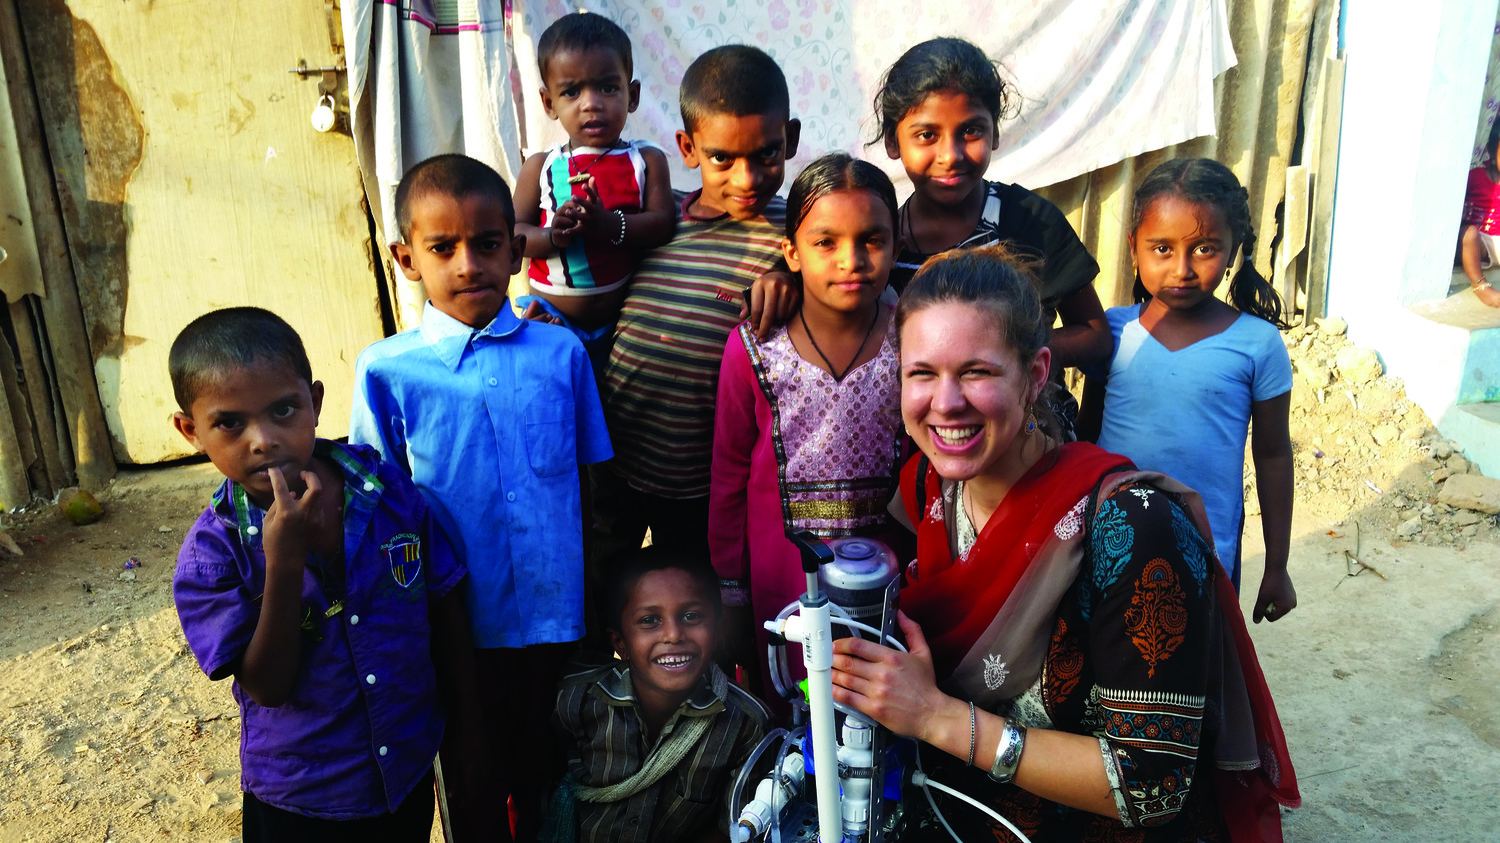 Image of student Kaylea Brase and children in Bangalore. She is holding the water filtration device she developed.